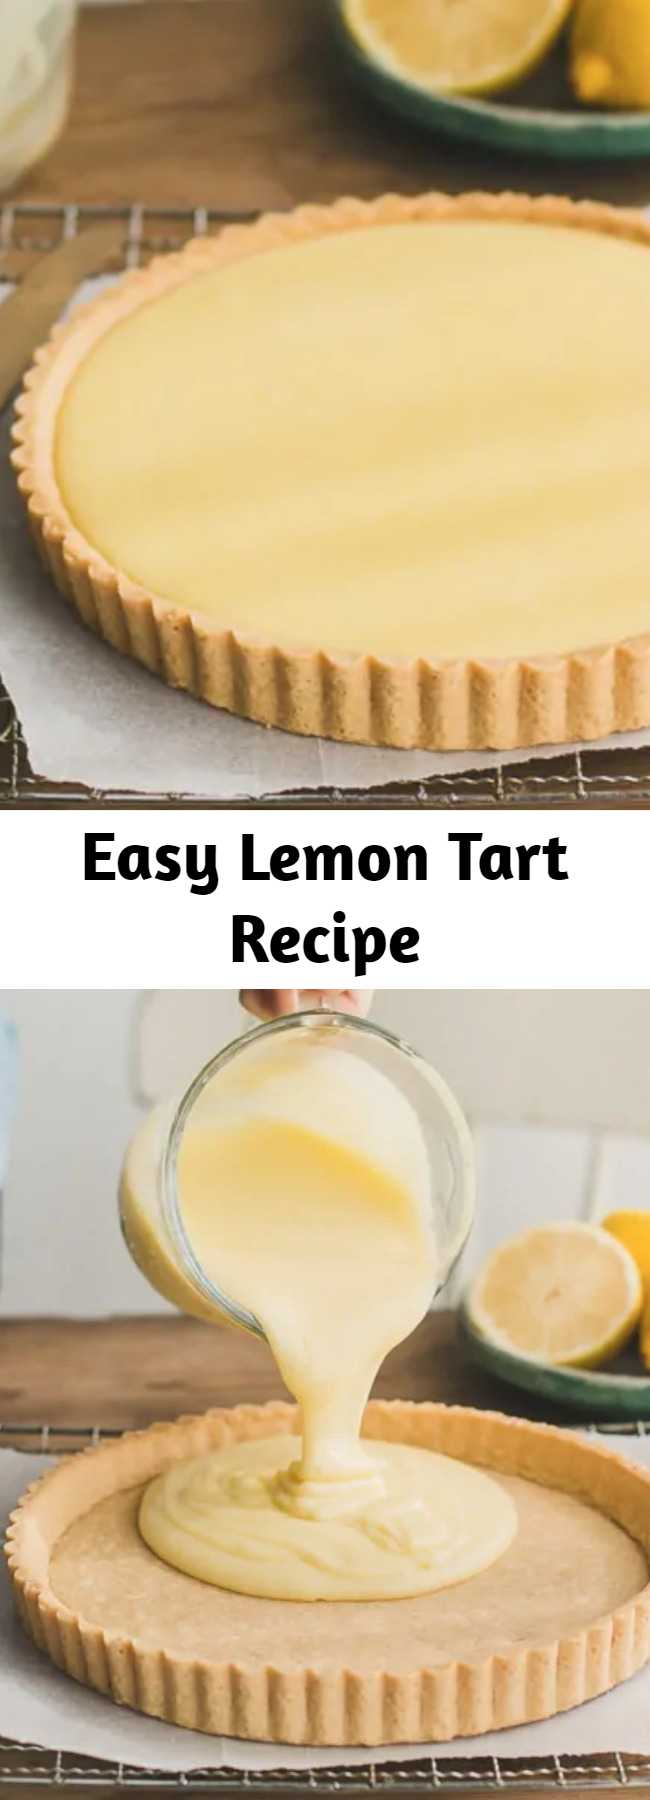 Easy Lemon Tart Recipe - This traditional French lemon tart recipe has been a favorite in my family for years! It's made of a classic sweet tart crust and a creamy, dreamy lemon curd filling.